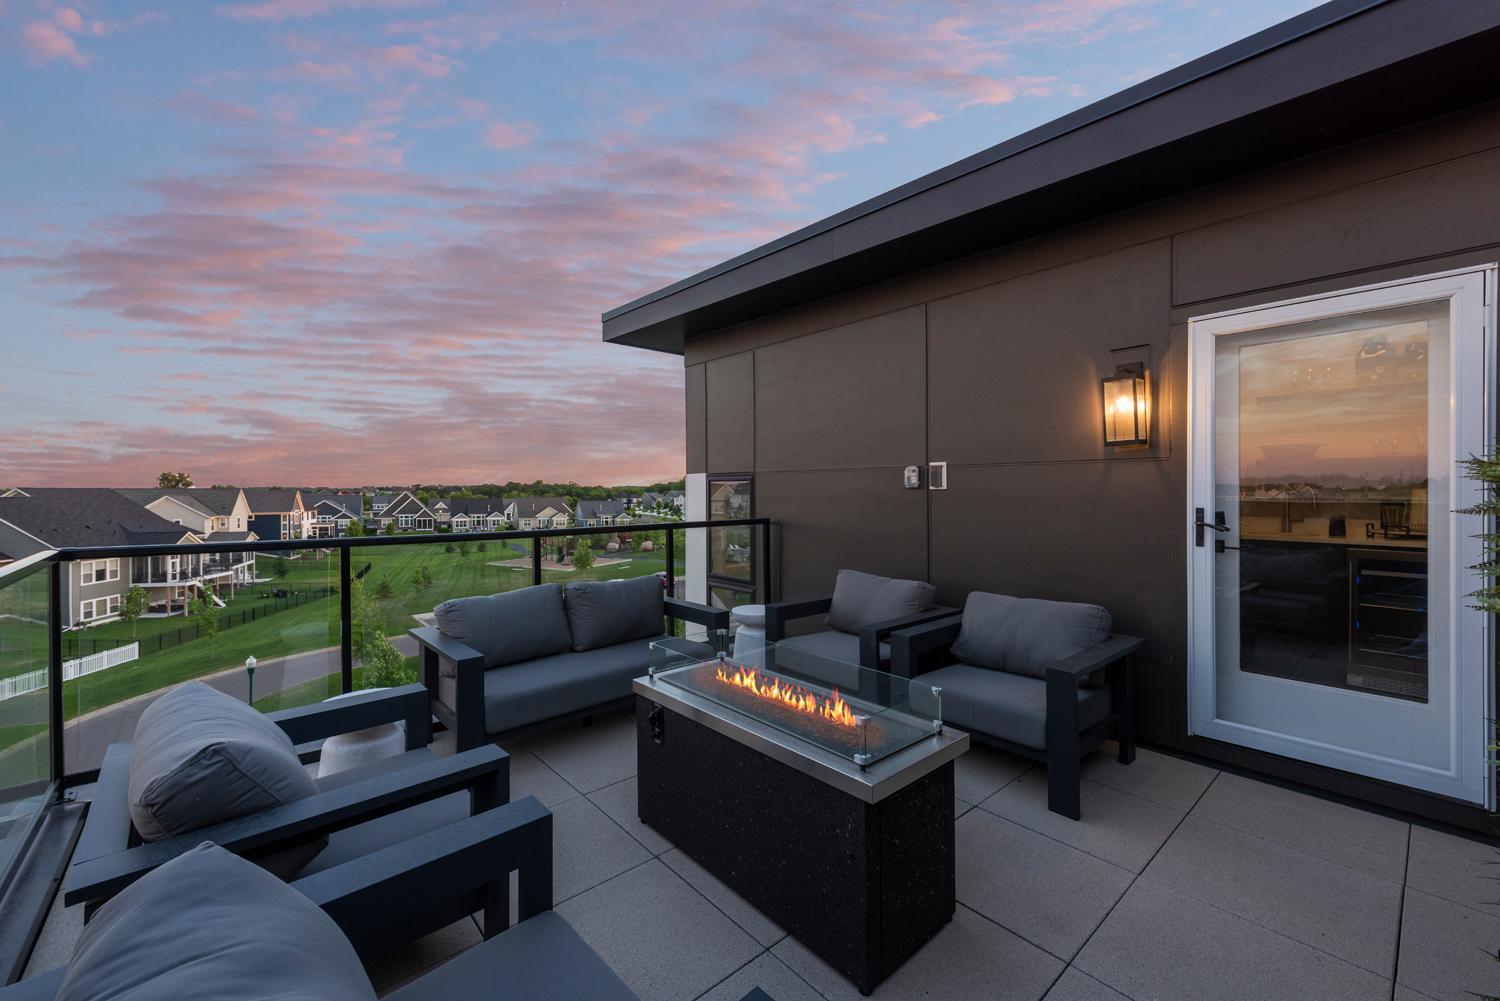 Enjoy your evenings on your private rooftop patio!